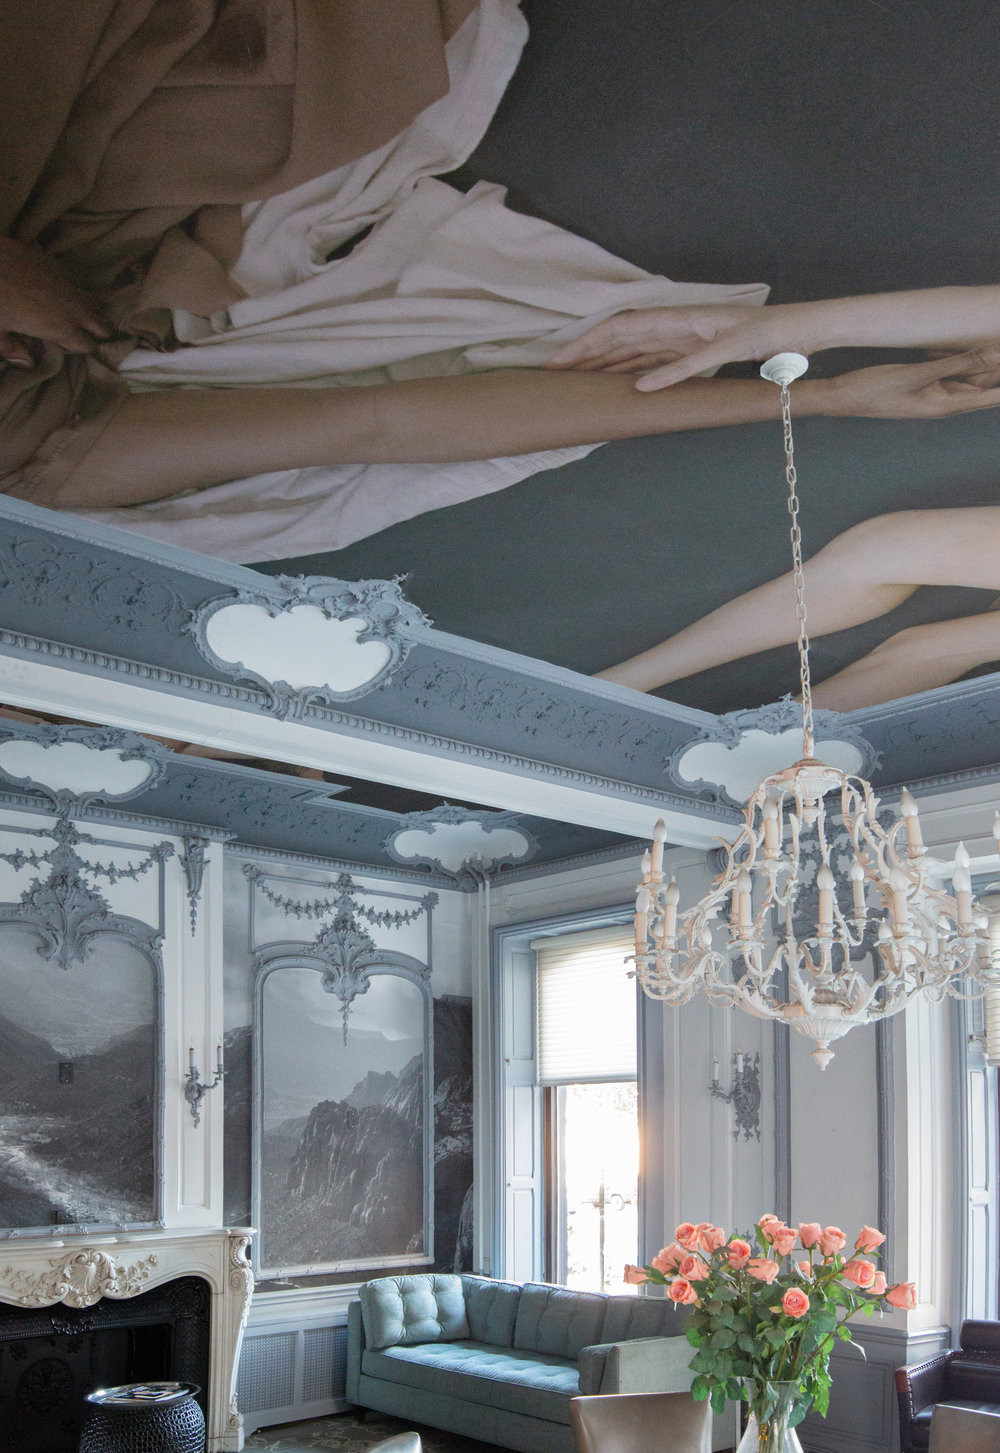 A luxurious room with a renaissance style mural on the ceiling.